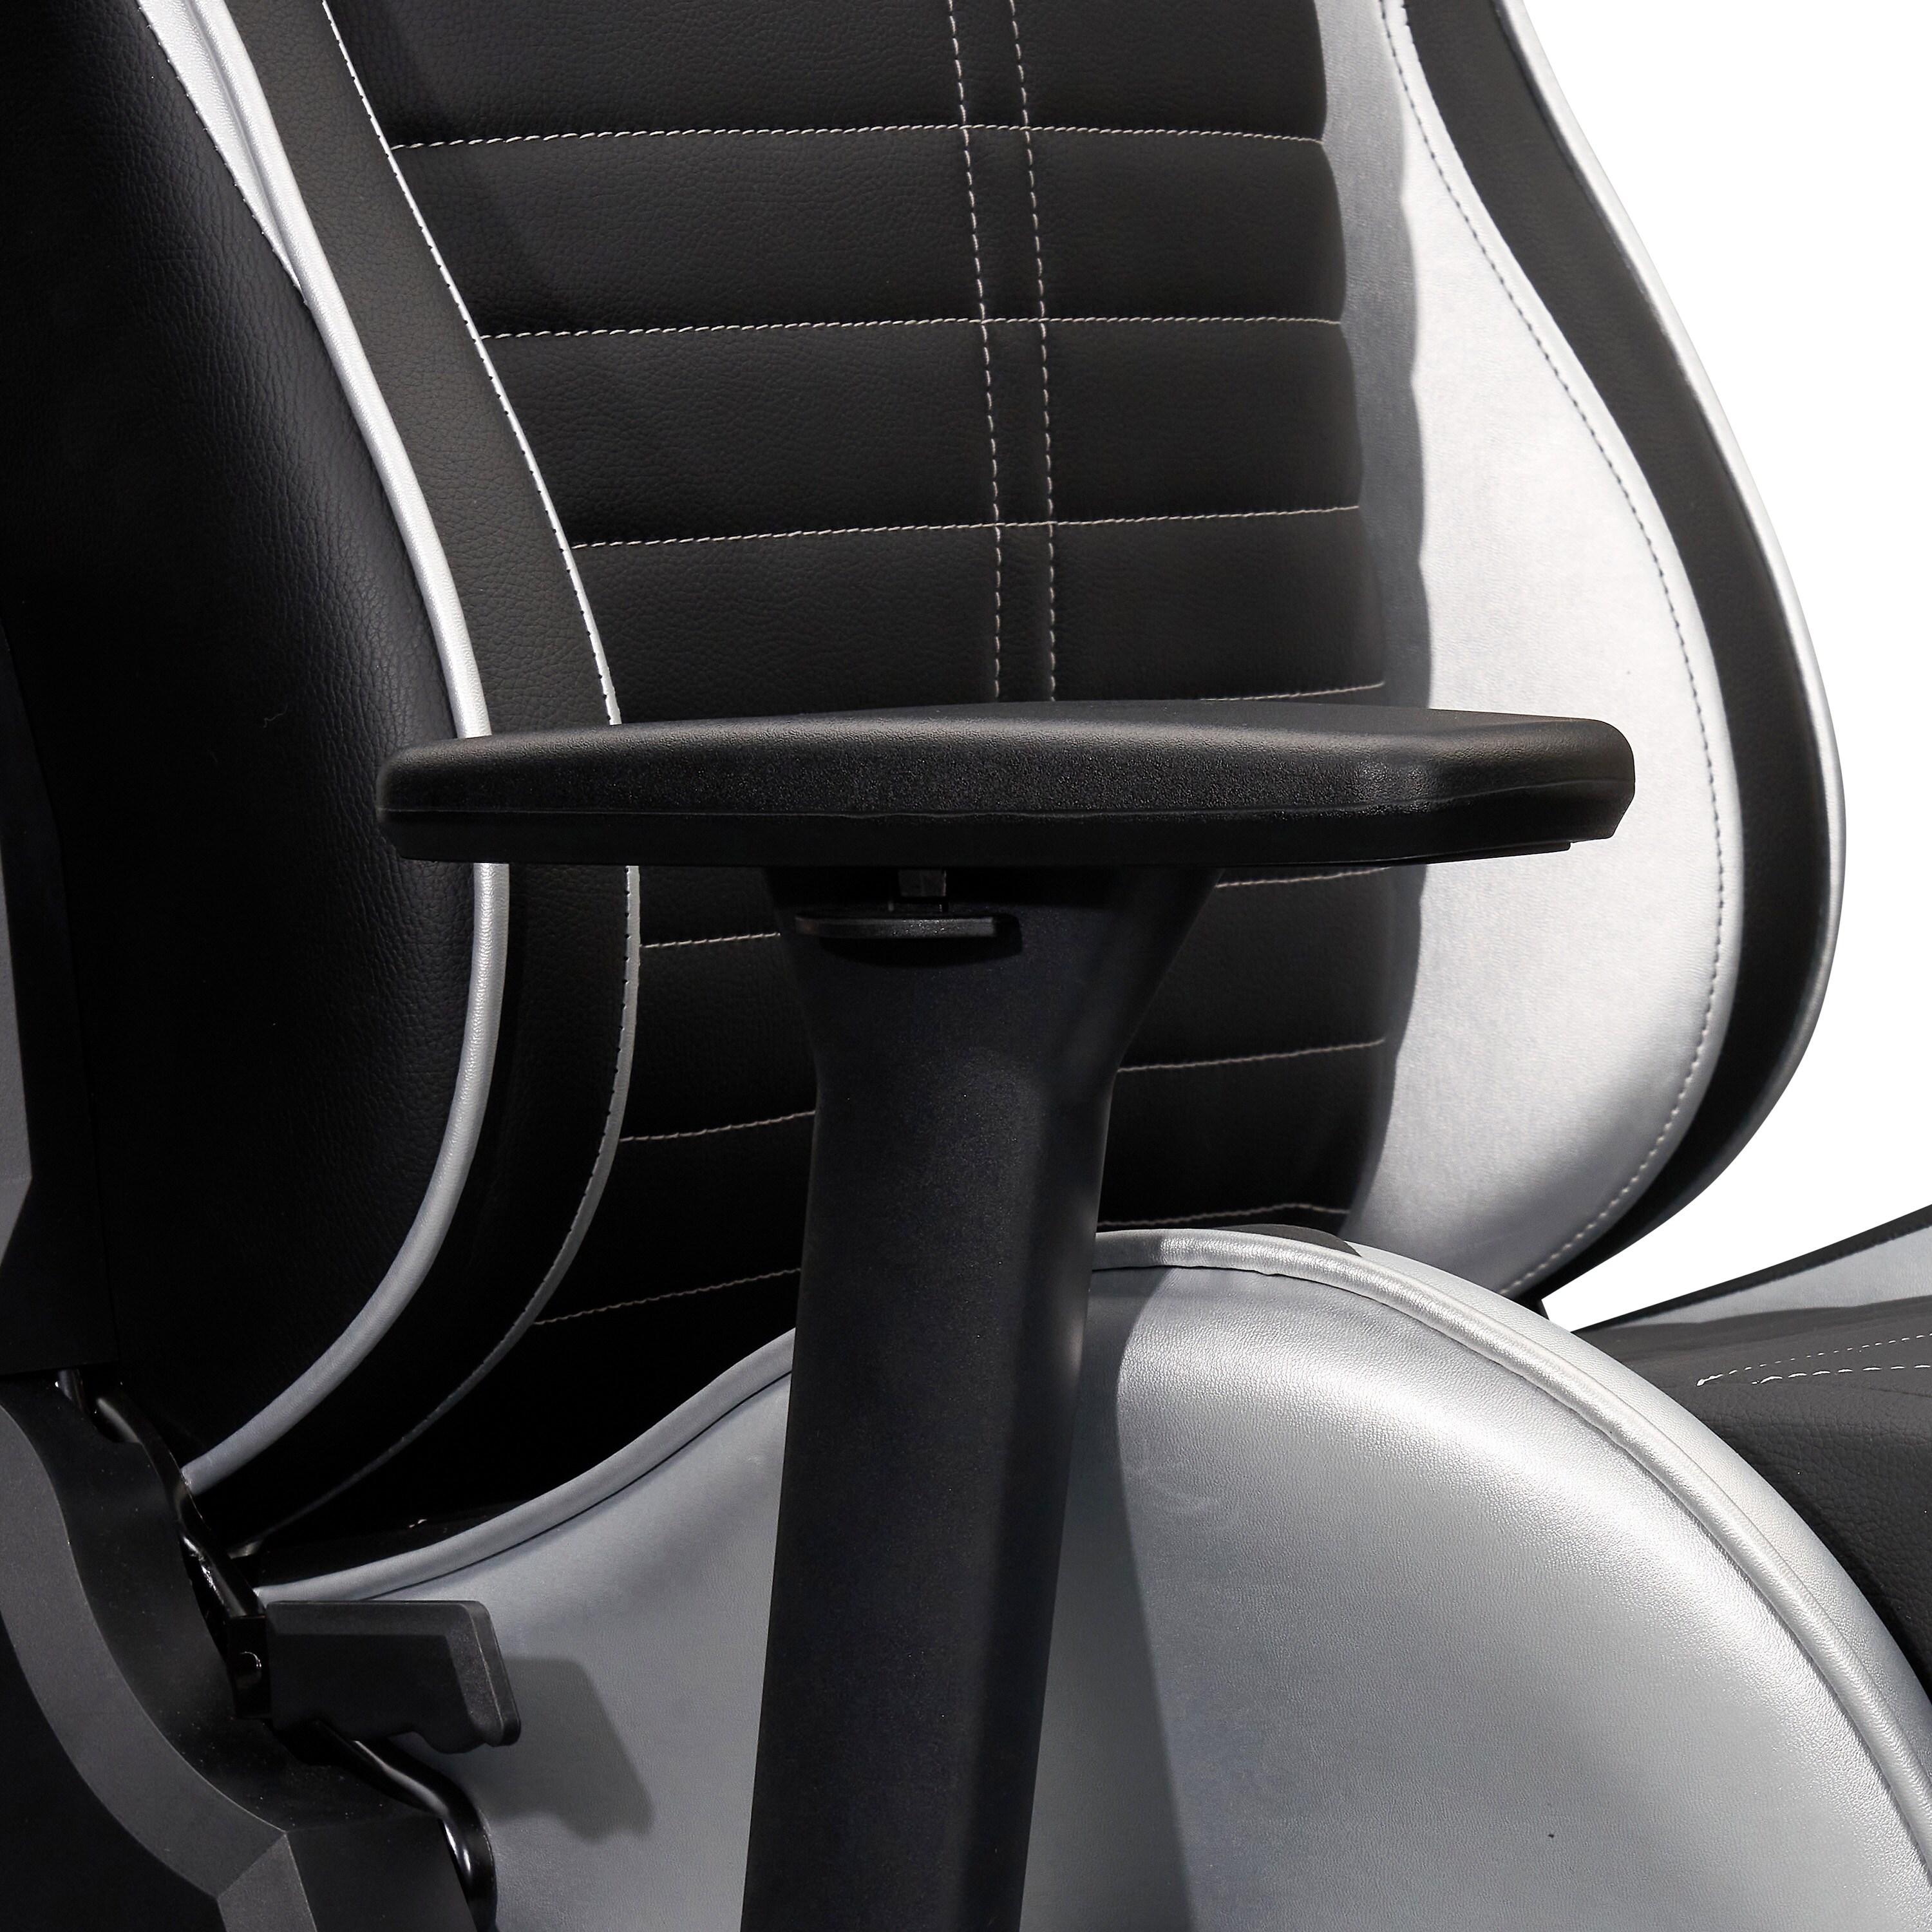 https://ak1.ostkcdn.com/images/products/is/images/direct/b6a0fc876022e8e5b2765655b1833233e9906dc2/Sport-Ergonomic-Racing-Style-Gaming-Chair-with-Back-Support-Pillow%2C-Silver.jpg